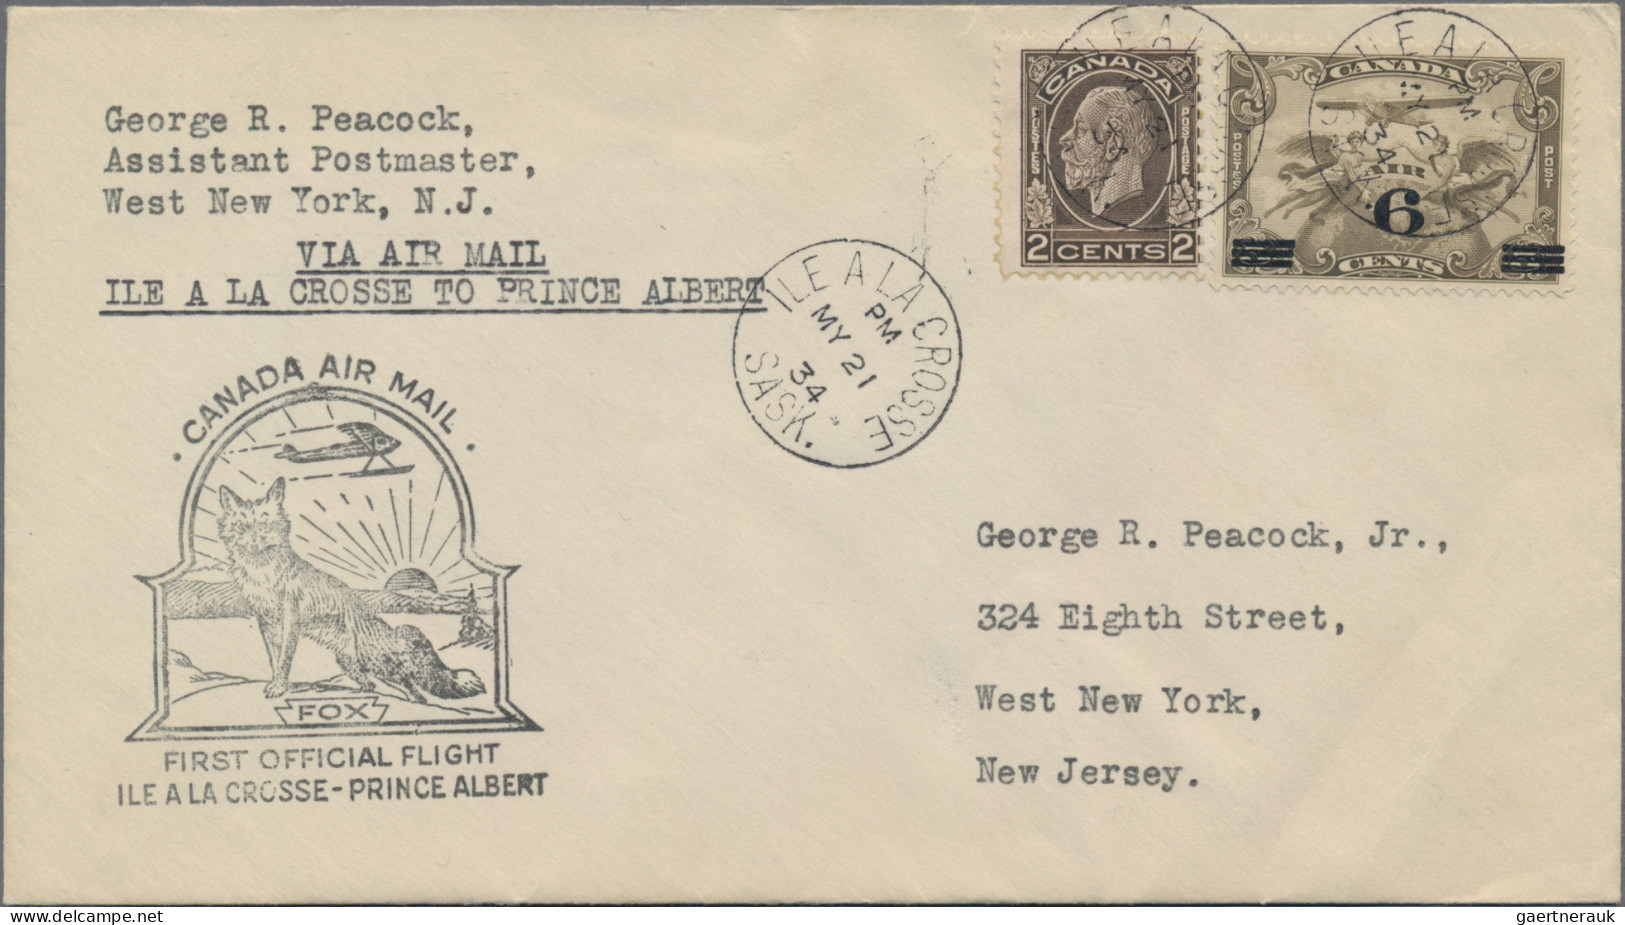 Air Mail: 1915/1951, assortment of 20 covers/cards, airmail and airmail-related,